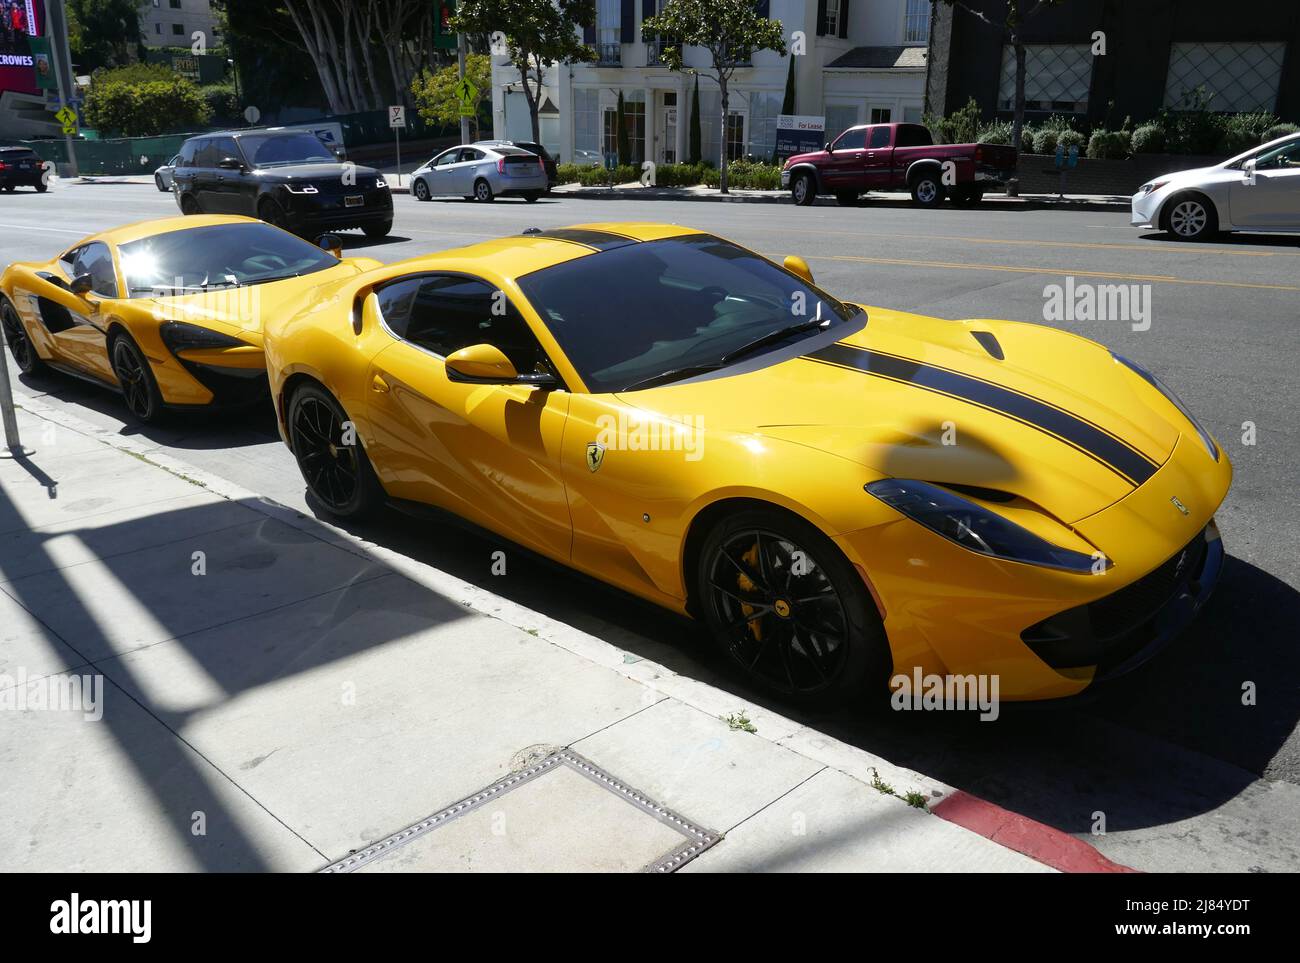 Los Angeles, California, USA 12th May 2022 A general view of atmosphere of Yellow McLaren and Yellow Ferrari on Sunset Blvd on May 12, 2022 in Los Angeles, California, USA. Photo by Barry King/Alamy Stock Photo Stock Photo